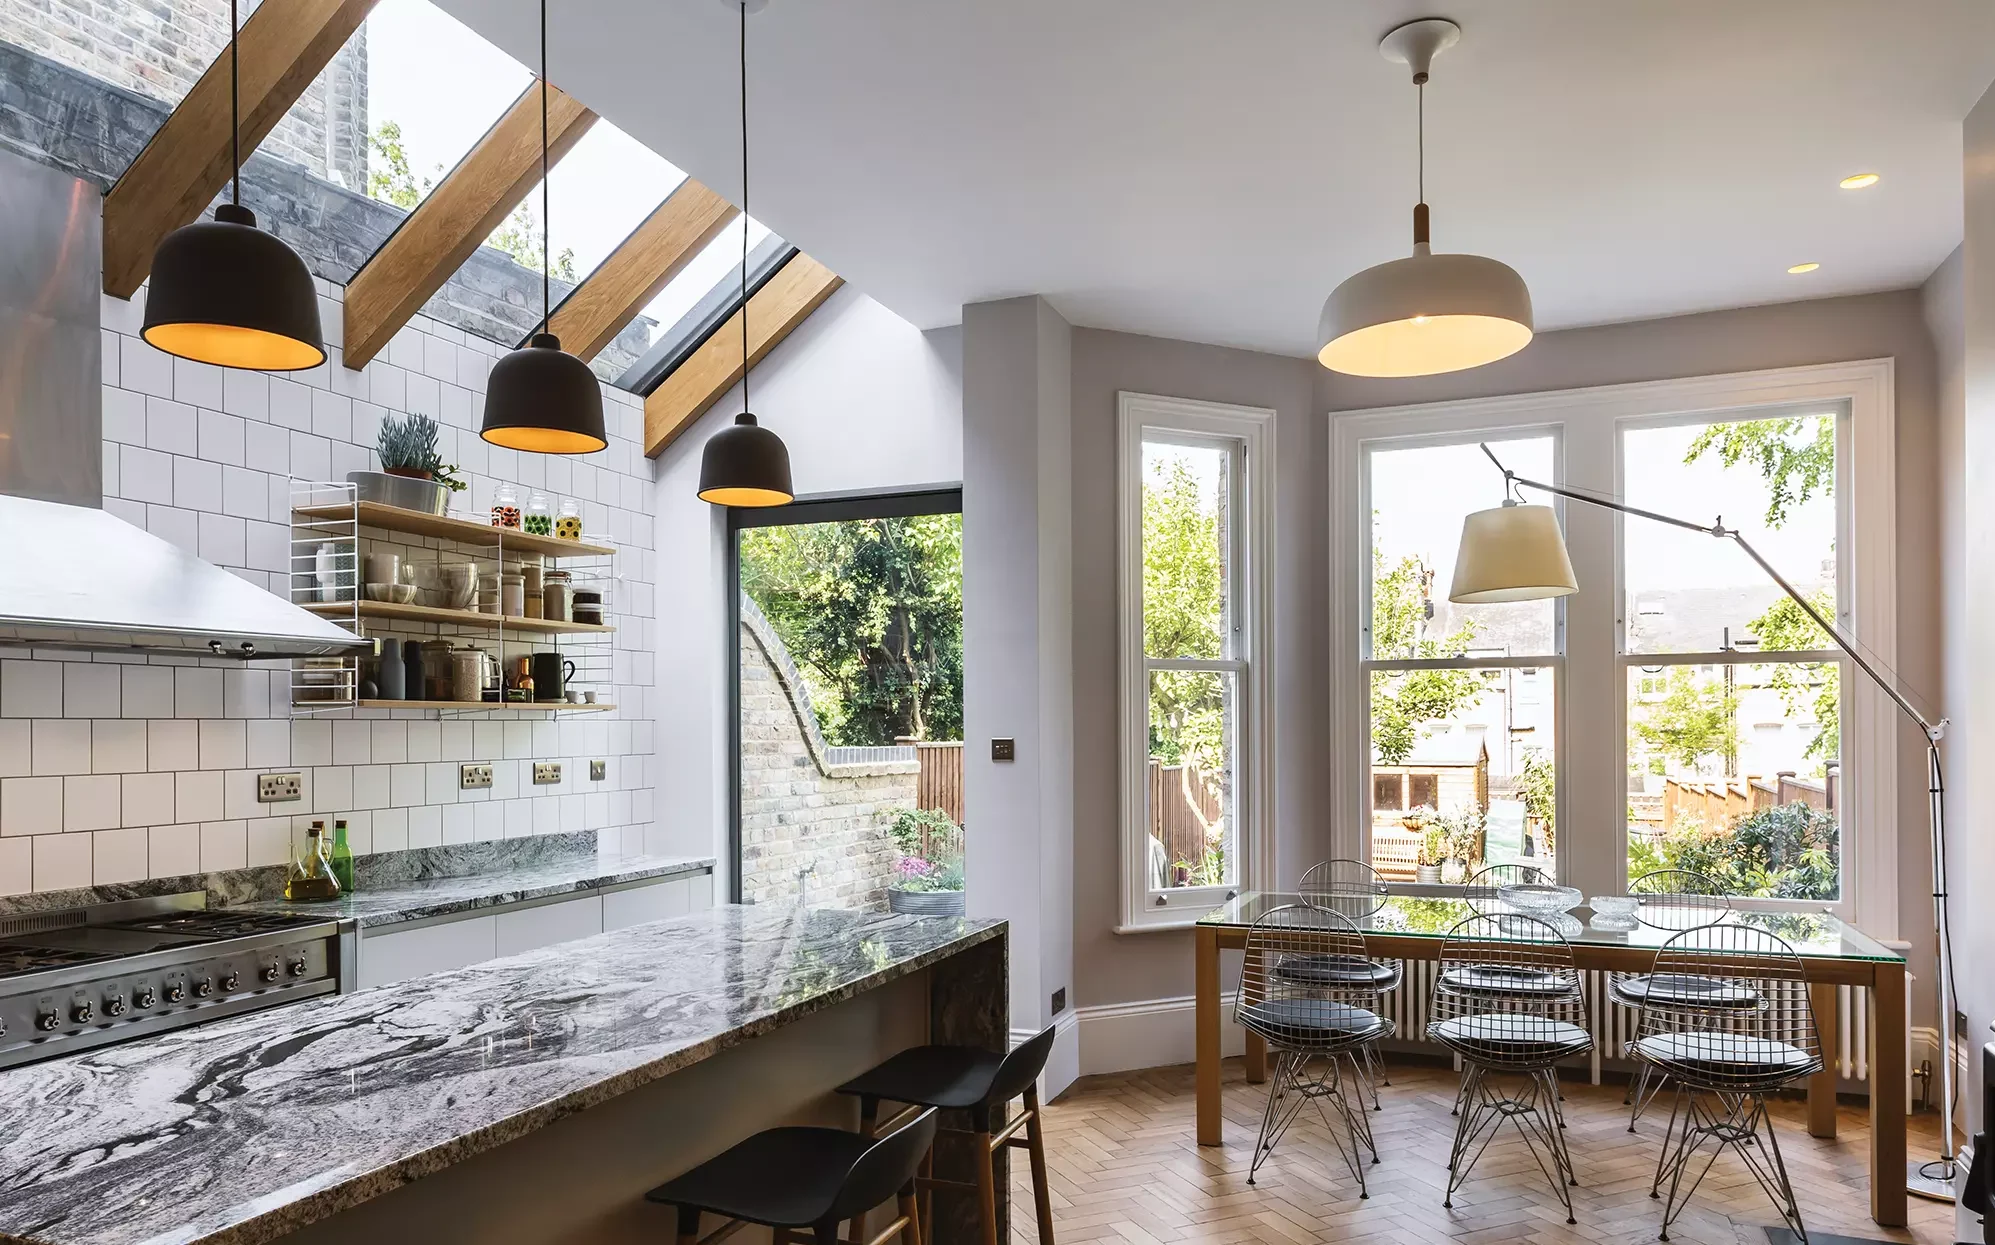 Kitchen Box Window Extends Beyond the Walls for Added Space and Light